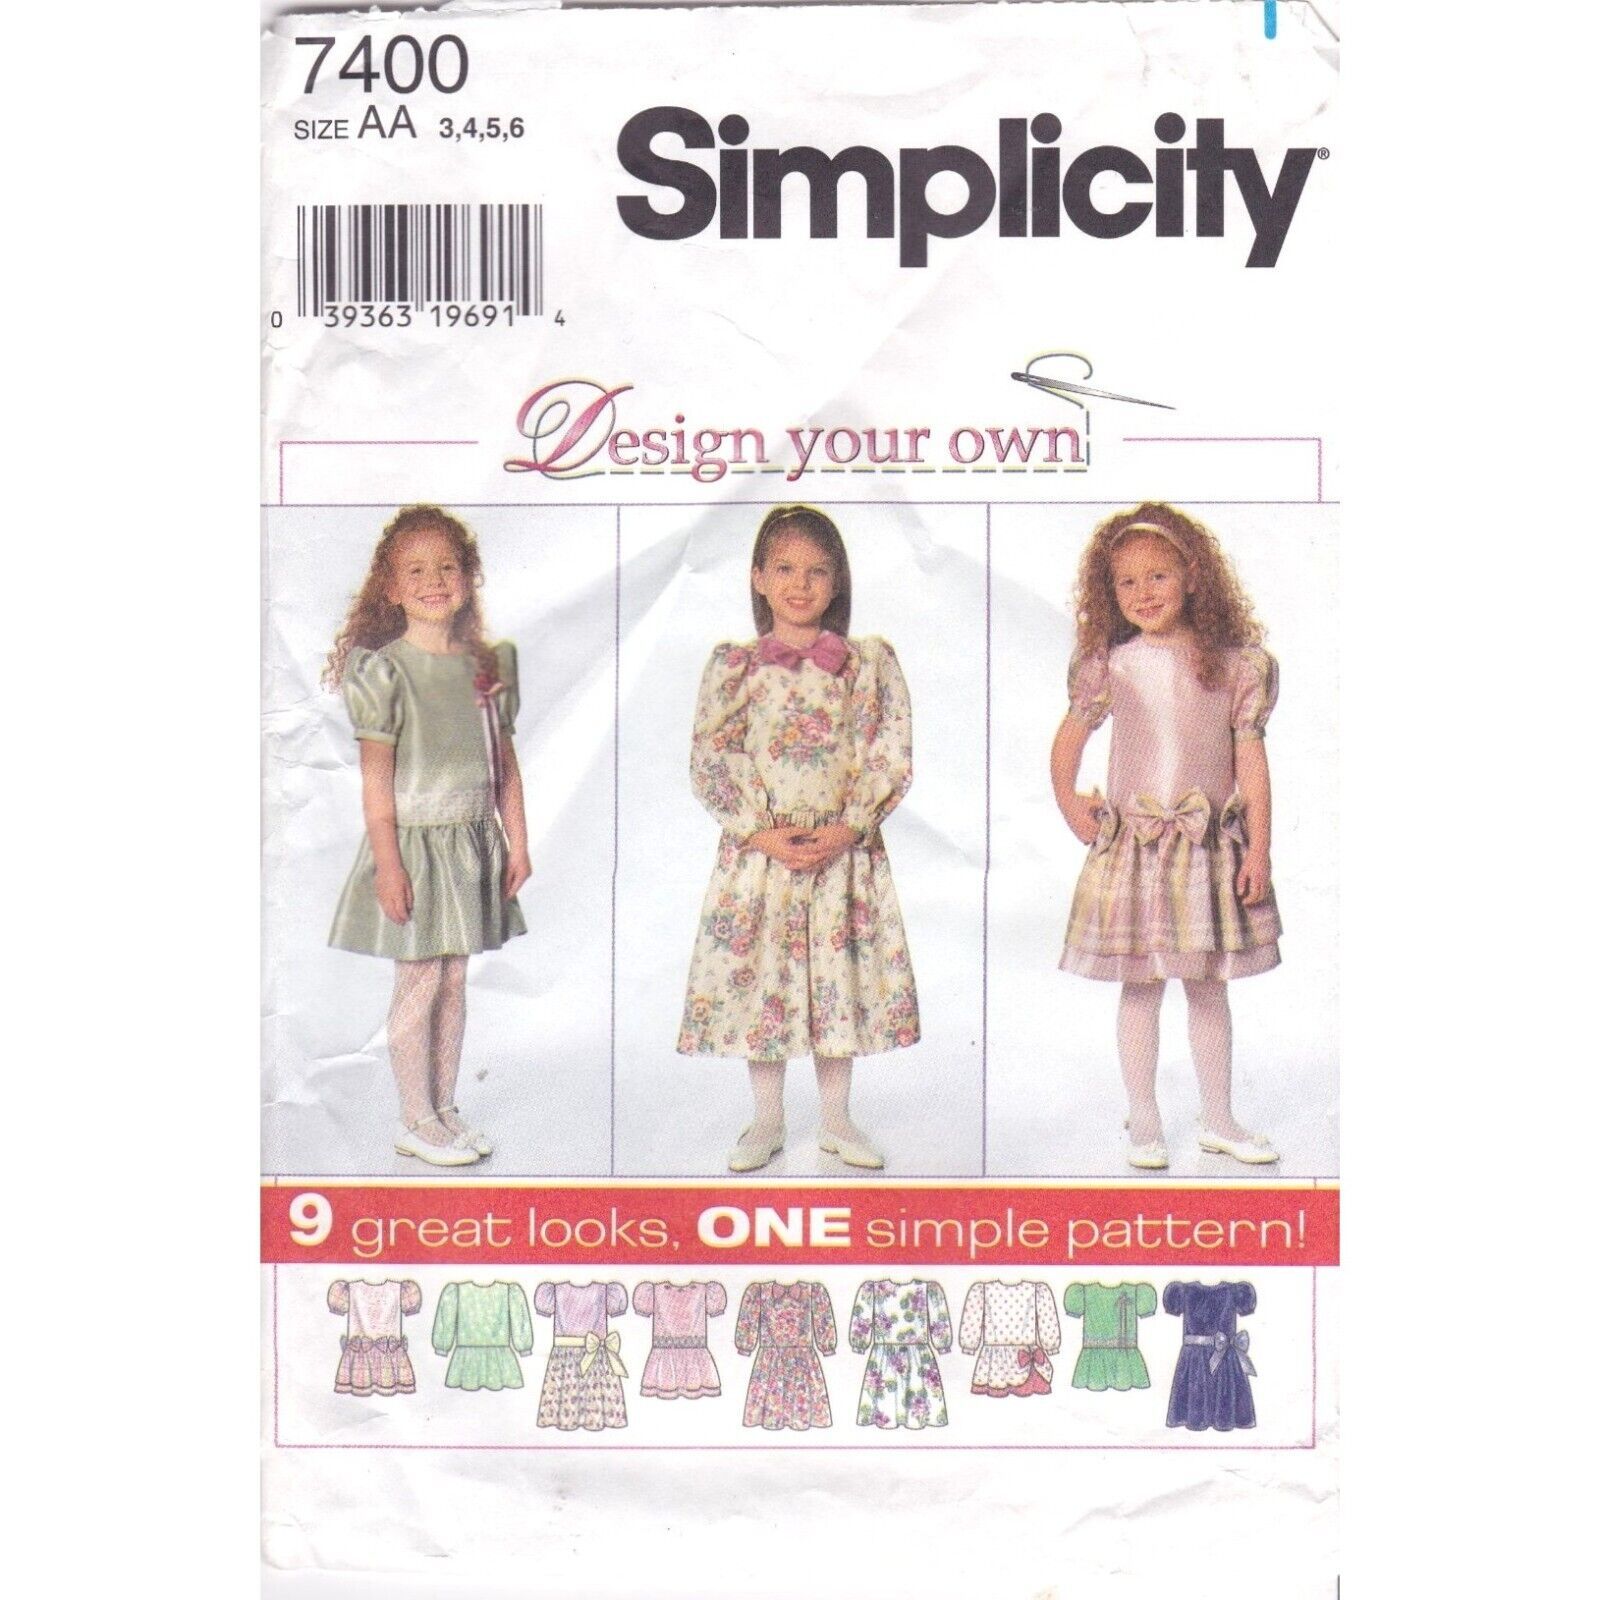 Sewing PATTERN Simplicity 7400, Design Your Own 1996 Childs Dress, Girls Size AA - £7.00 GBP